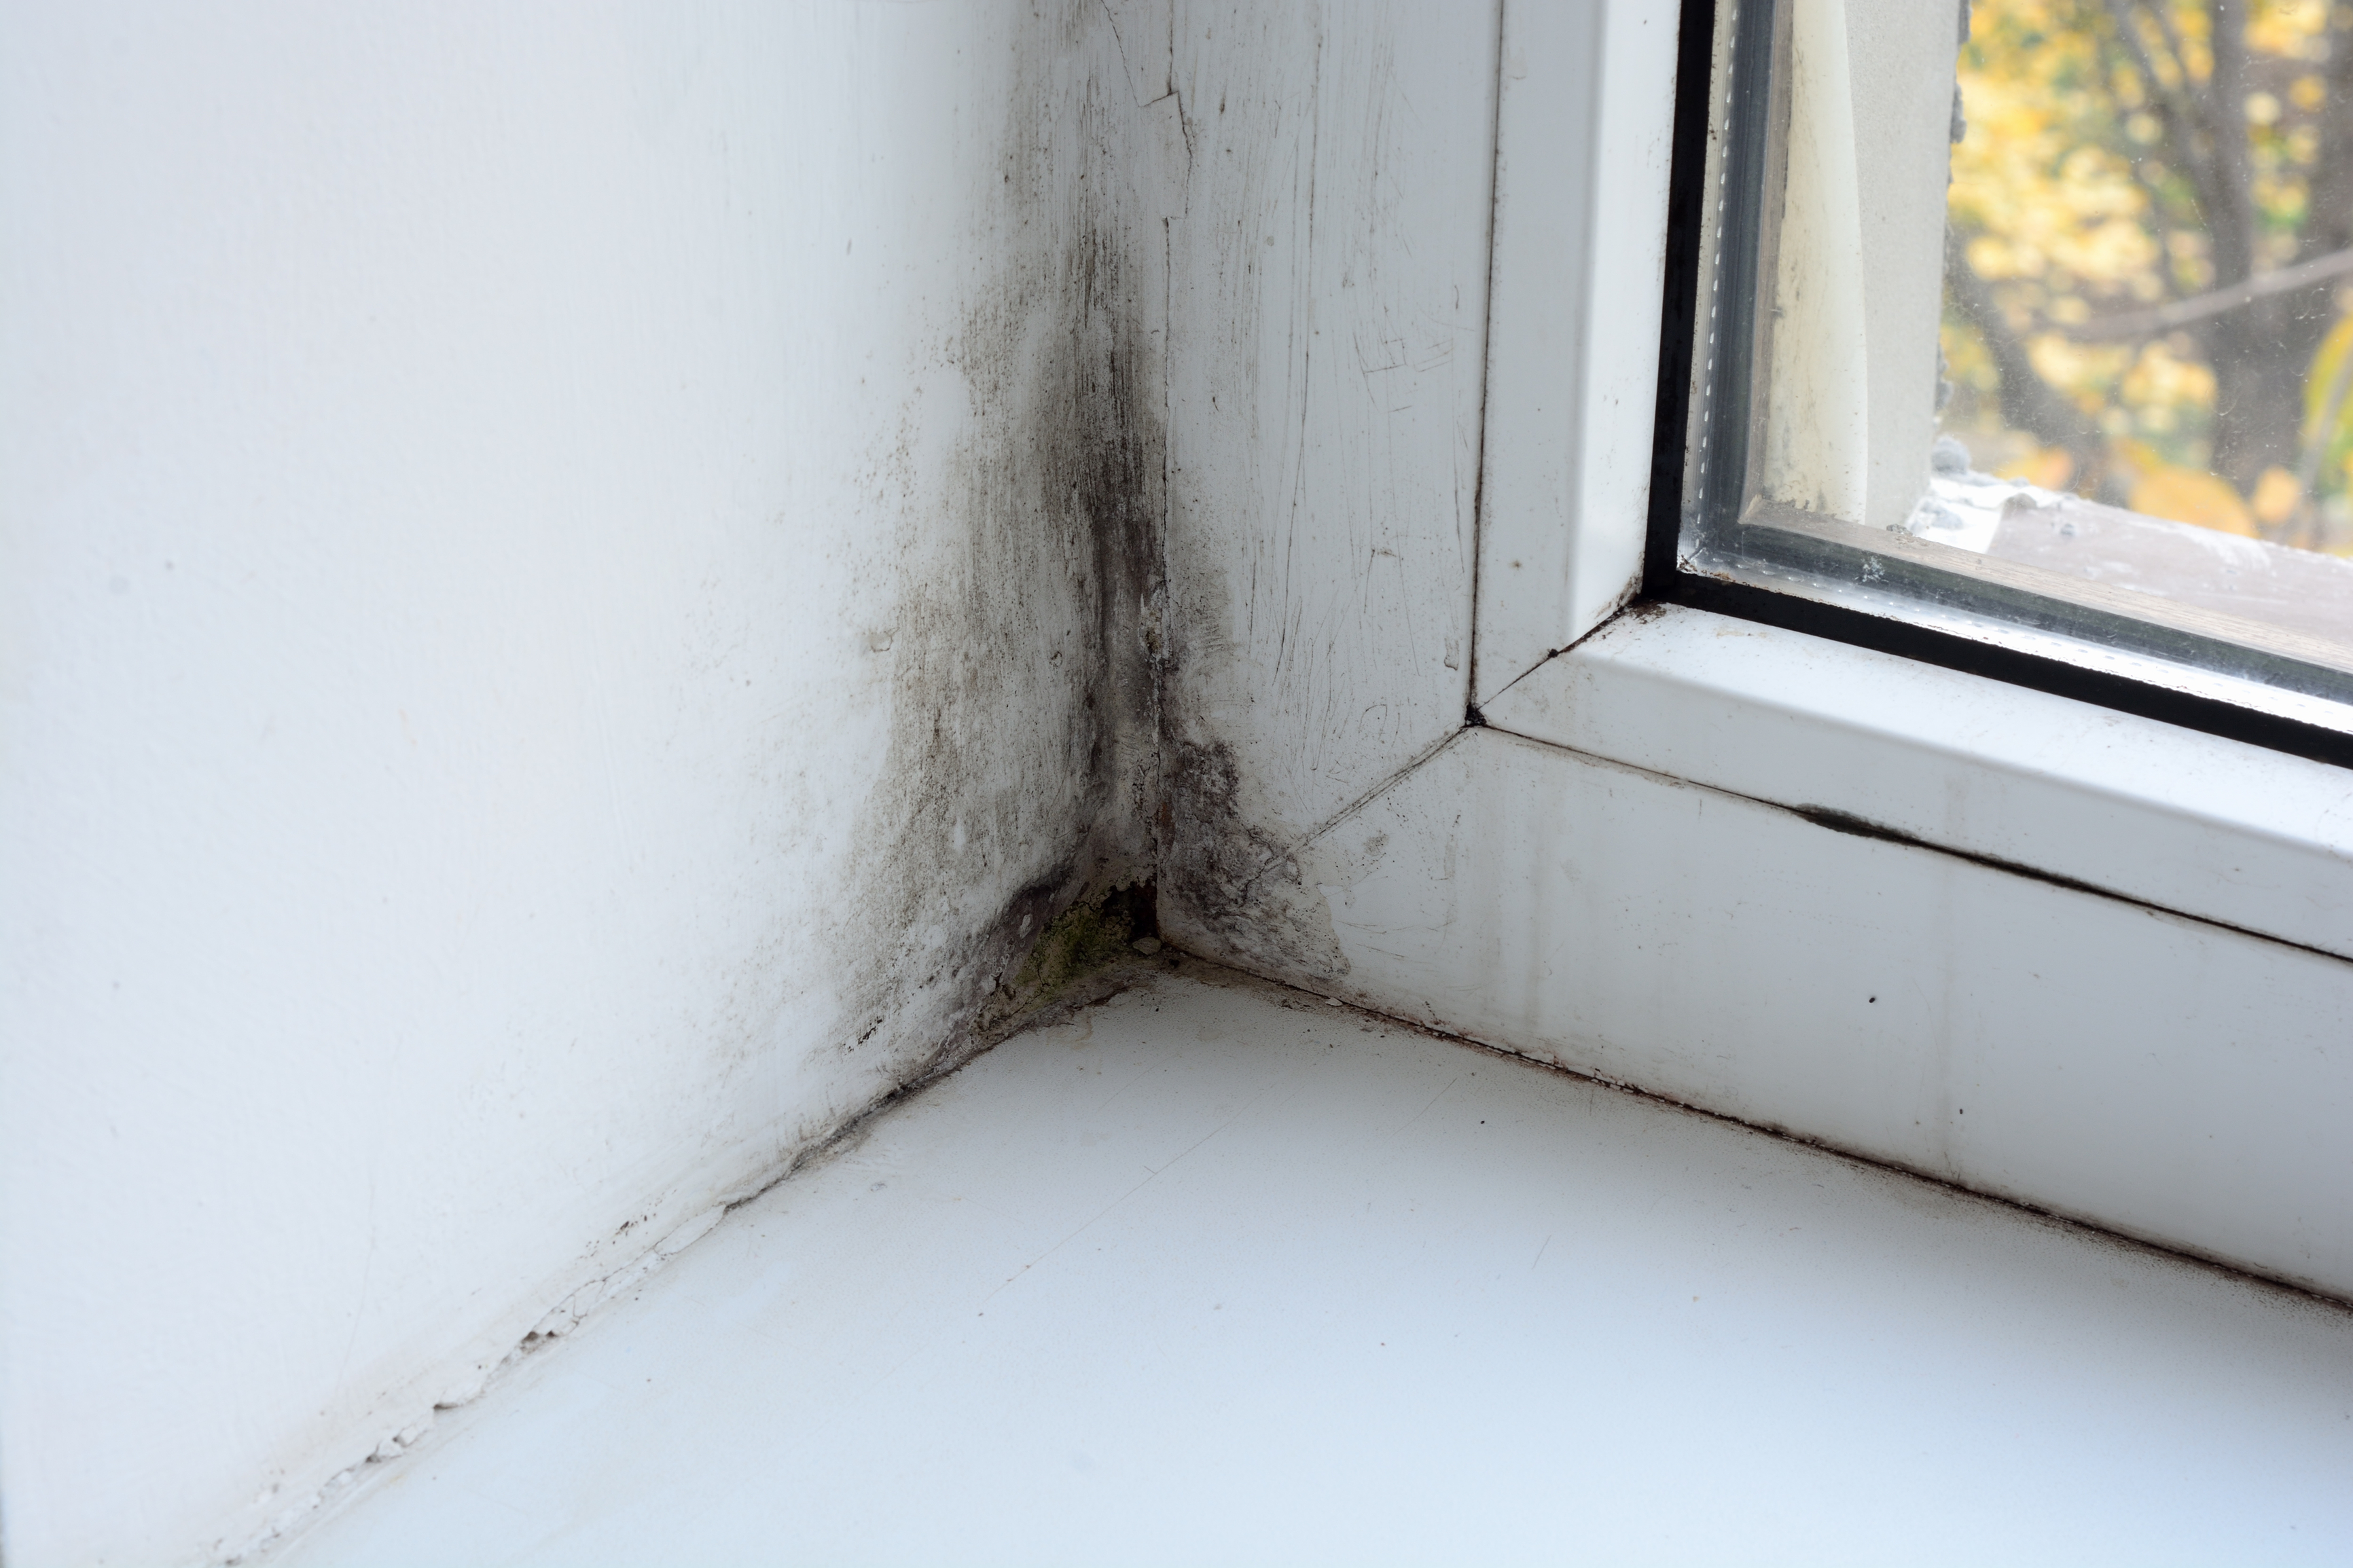 How to get rid of mold in the house?